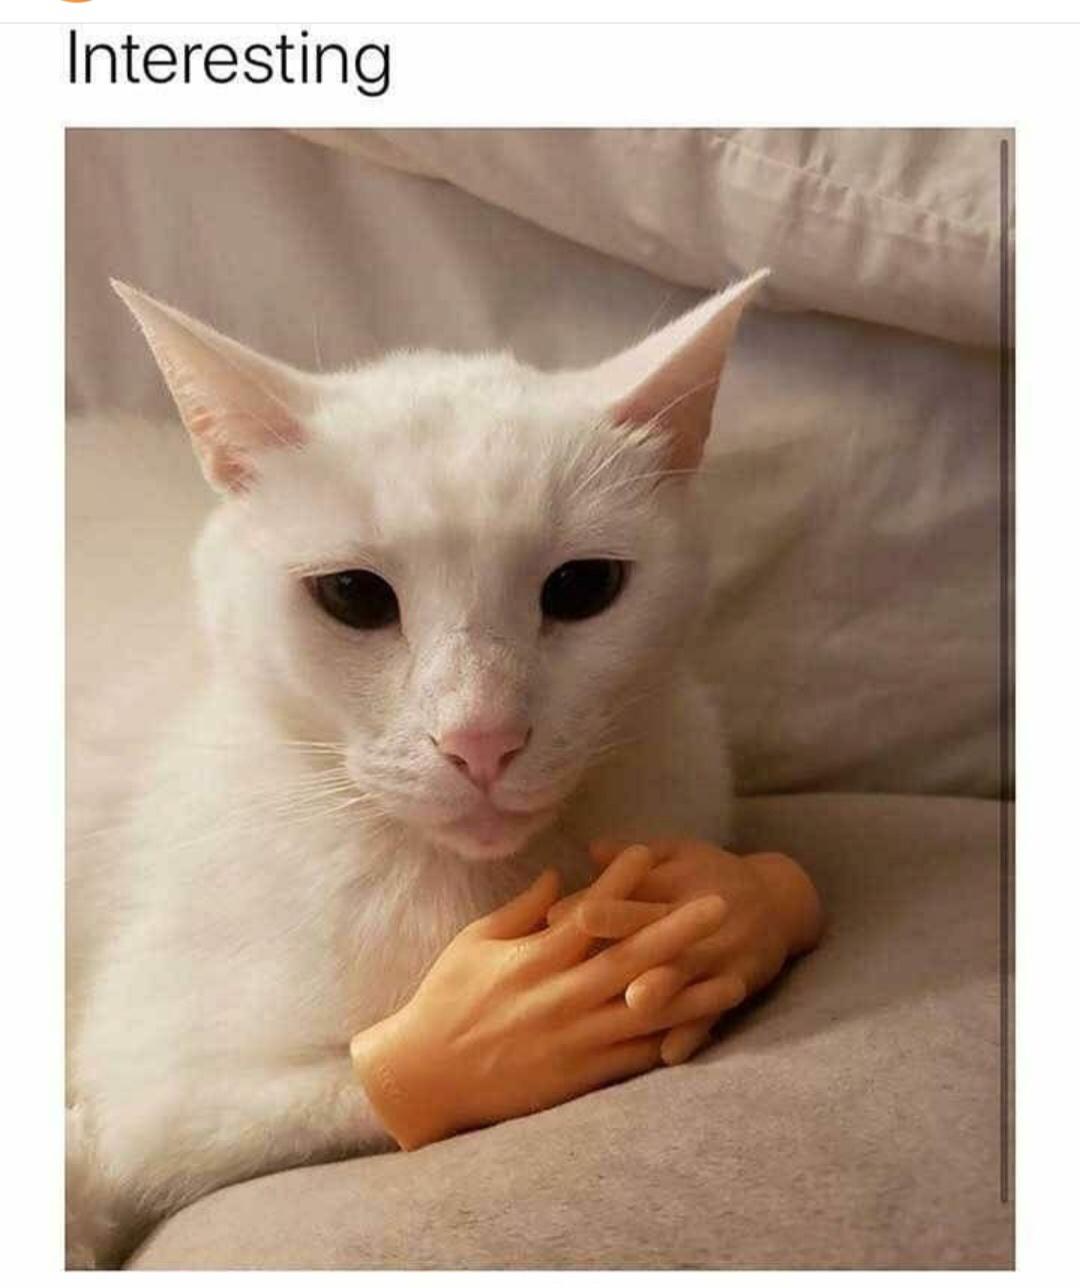 funny pics and memes - funny cats with tiny human hands - Interesting